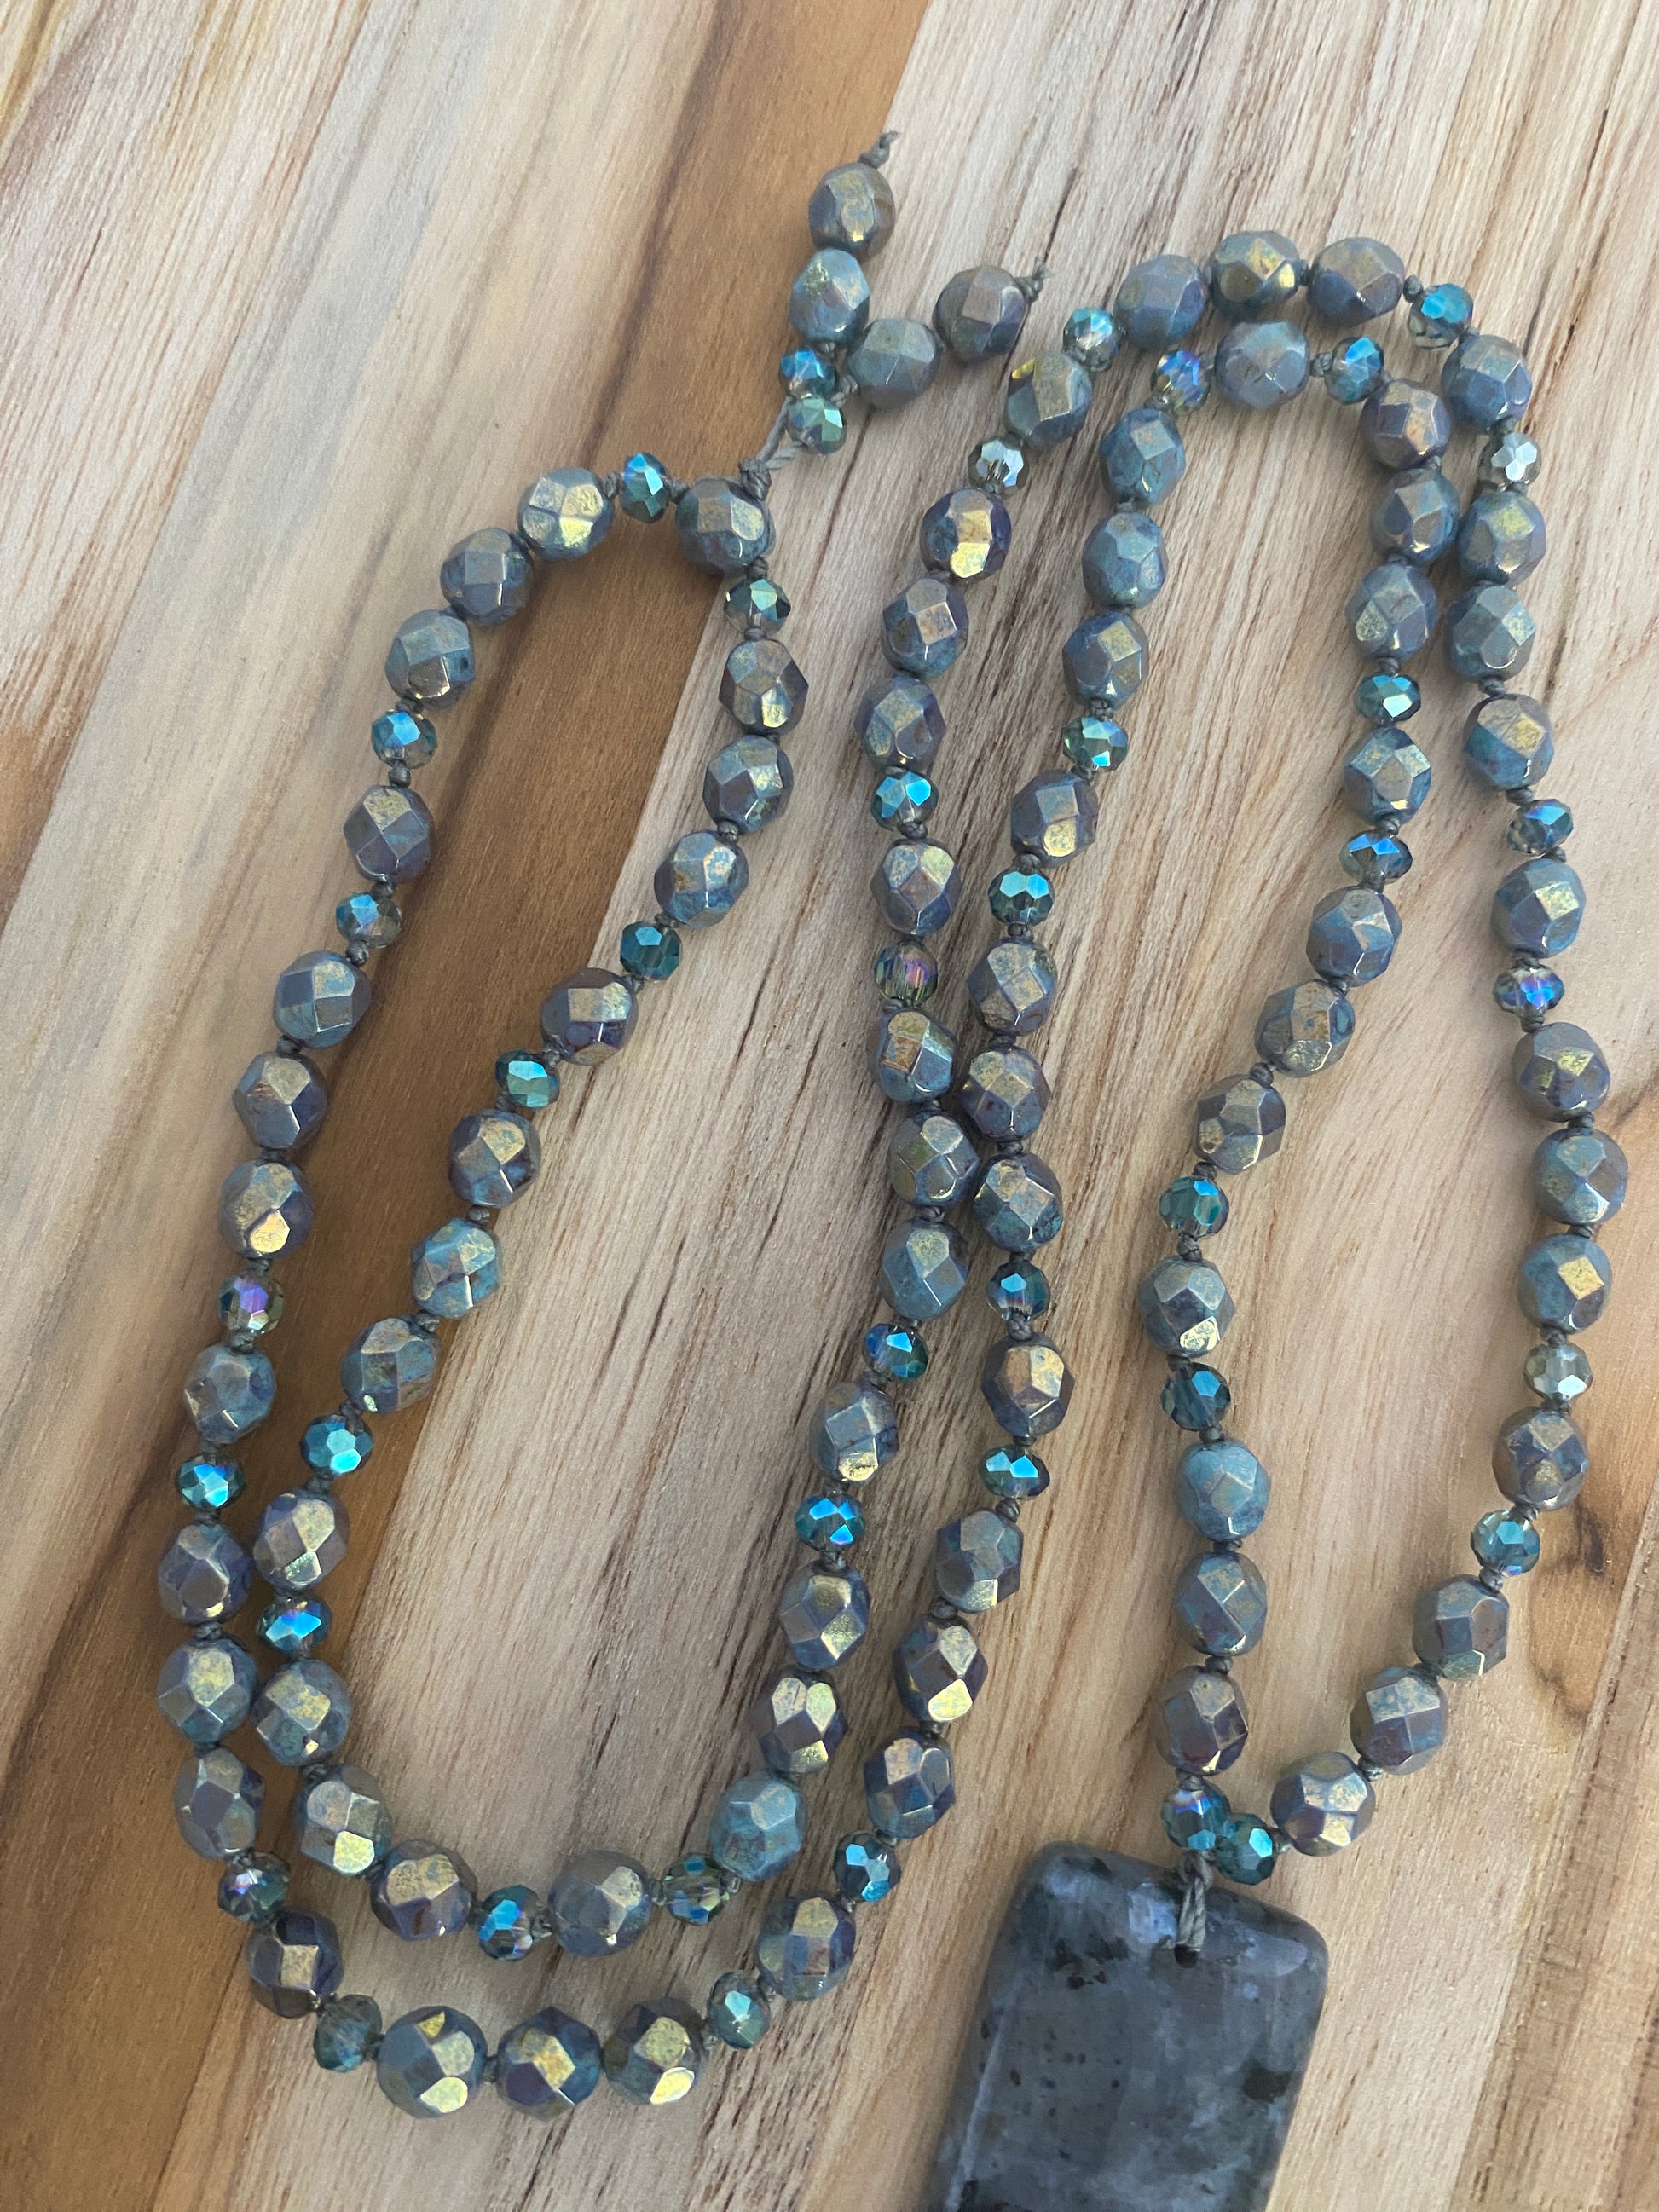 28" Long Hand Knotted Larvikite Pendant Necklace with Czech Glass Beads & Crystals - My Urban Gems